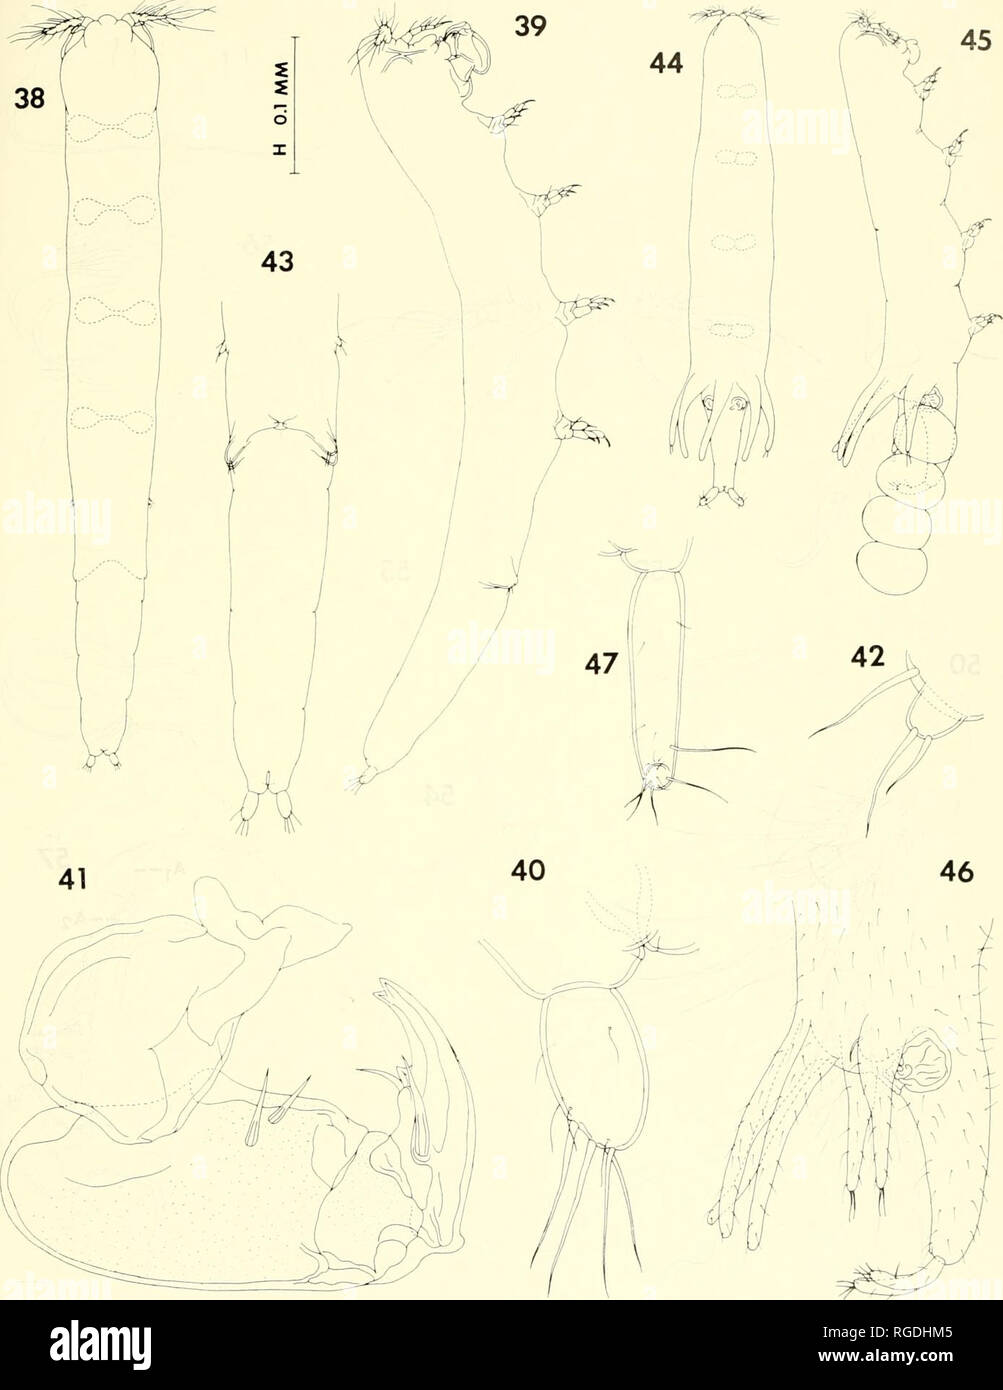 . Bulletin of the Museum of Comparative Zoology at Harvard College. Zoology. Parasitic Copepods from Corals in Madagascar • Humes and Ho 441. Figures 38-43. Xarilia exigua n. sp., male. 38, body, dorsal (B); 39, body, lateral (B); 40, caudal ramus, dorsal (E); 41, maxilliped. Inner (E); 42, leg 5, lateral (E); 43, urosome, ventral (H). Figures 44-47. Xarilia decorata n. sp., female. 44, body, dorsal (A); 45, body, lateral (A); 46, urosome, lateral (B); 47, caudal ramus, dorsal (G).. Please note that these images are extracted from scanned page images that may have been digitally enhanced for r Stock Photo